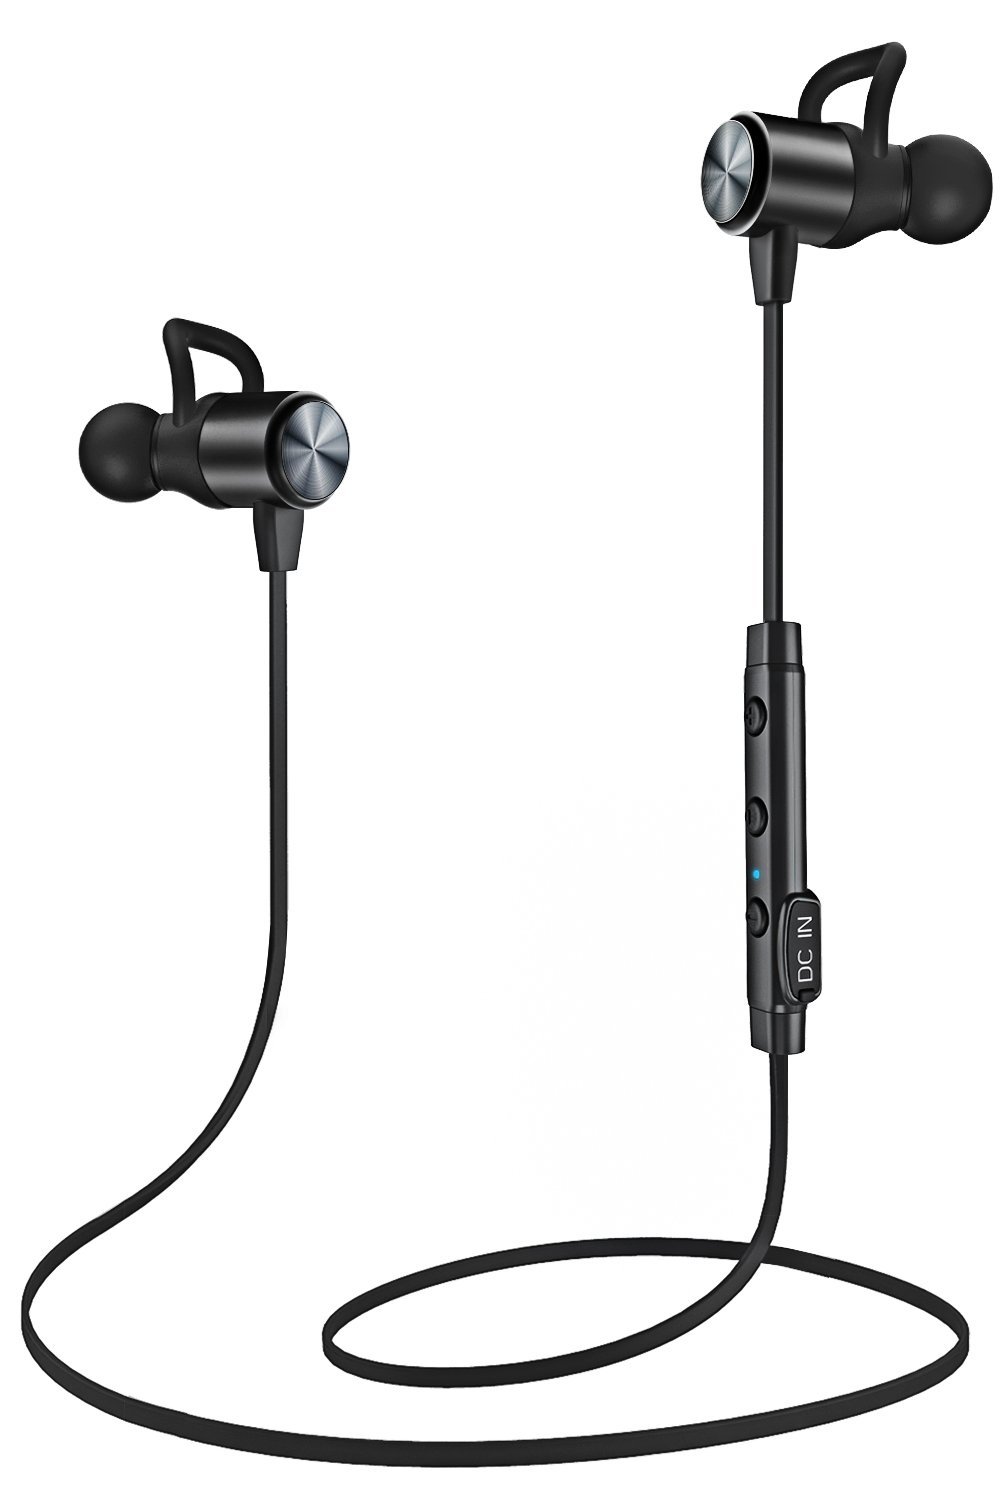 ATGOIN Bluetooth Headphones With Microphone